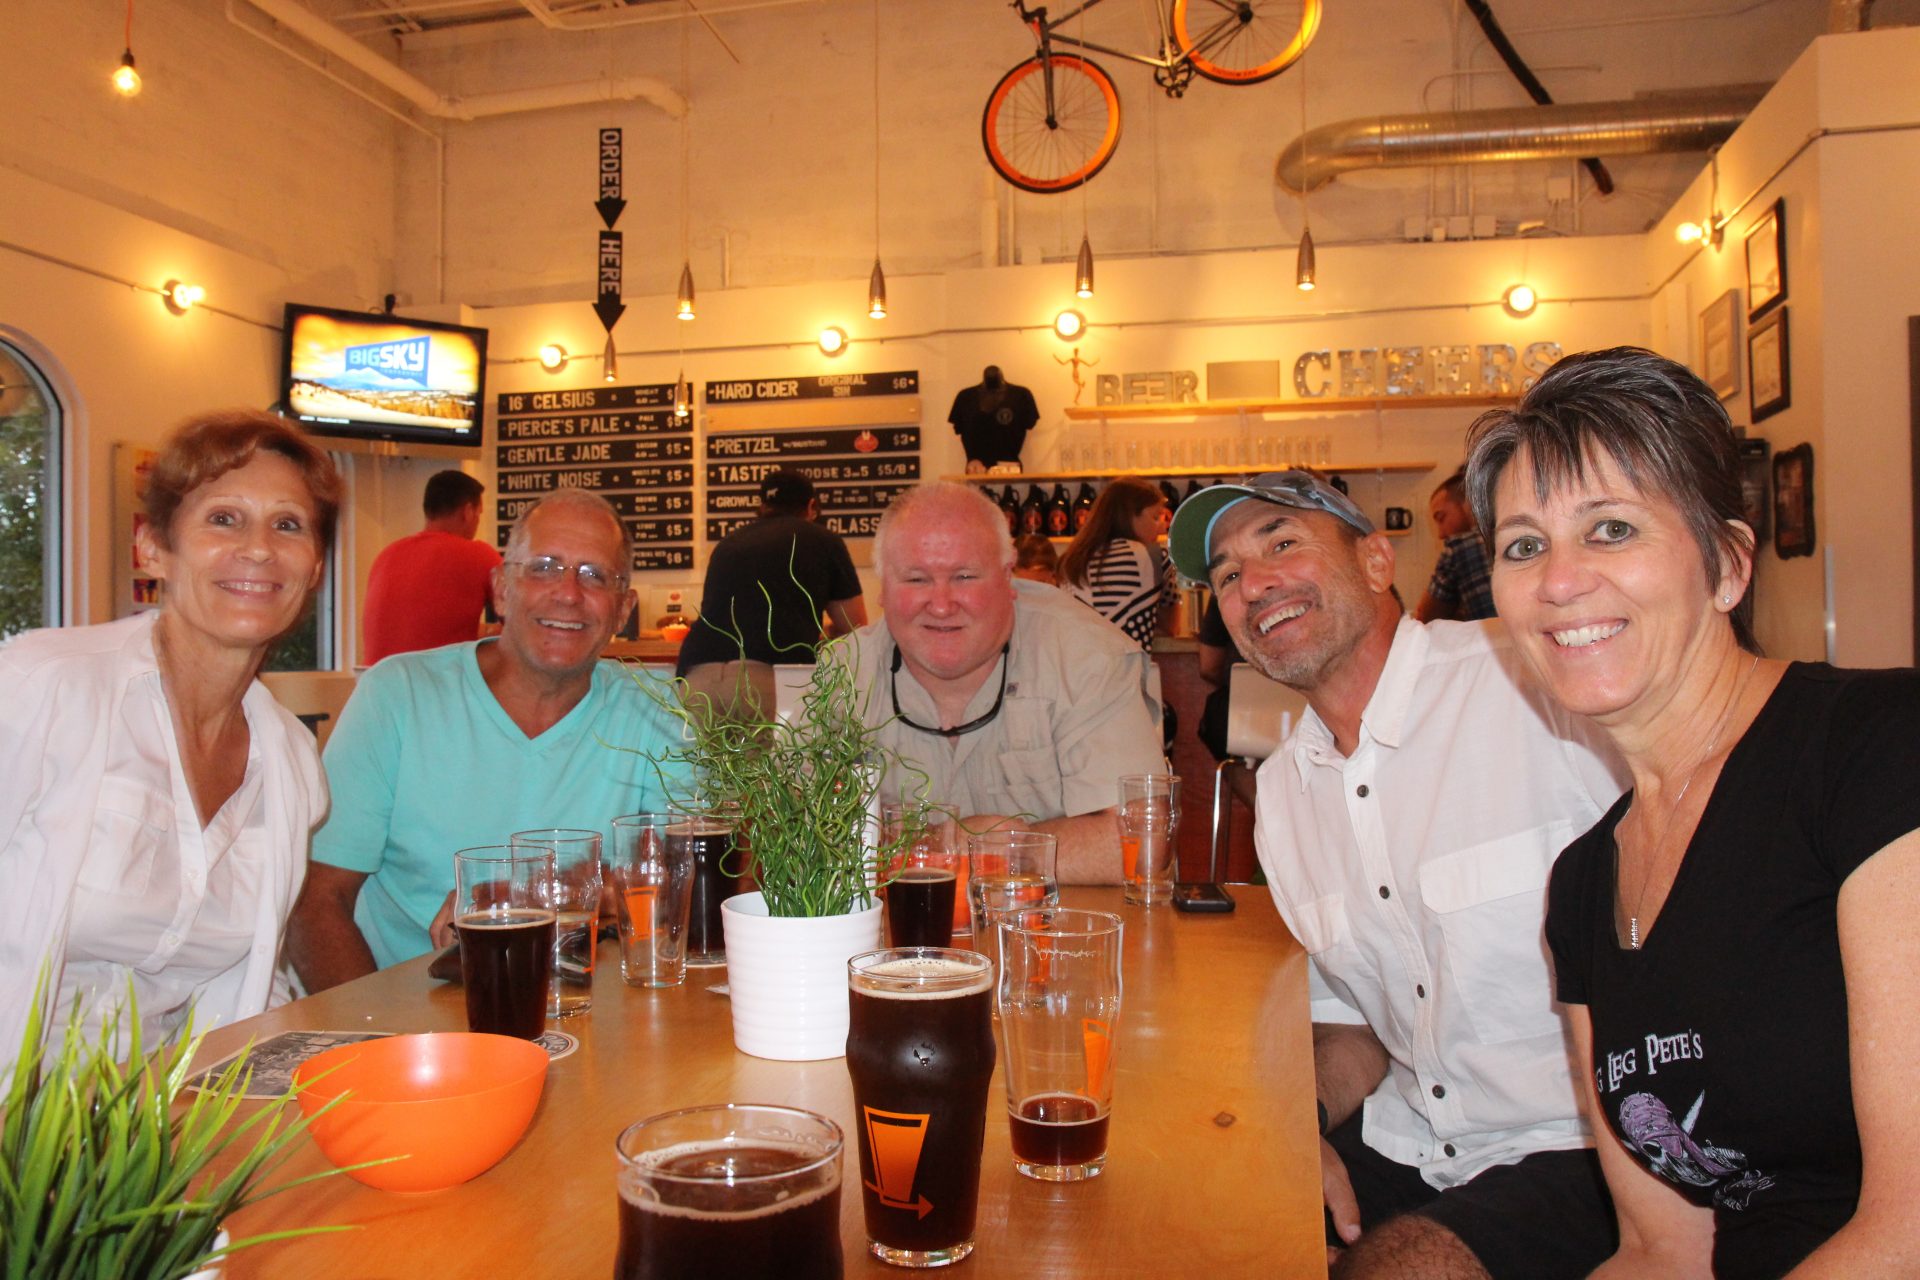 Fun night at the brewery...August 2015